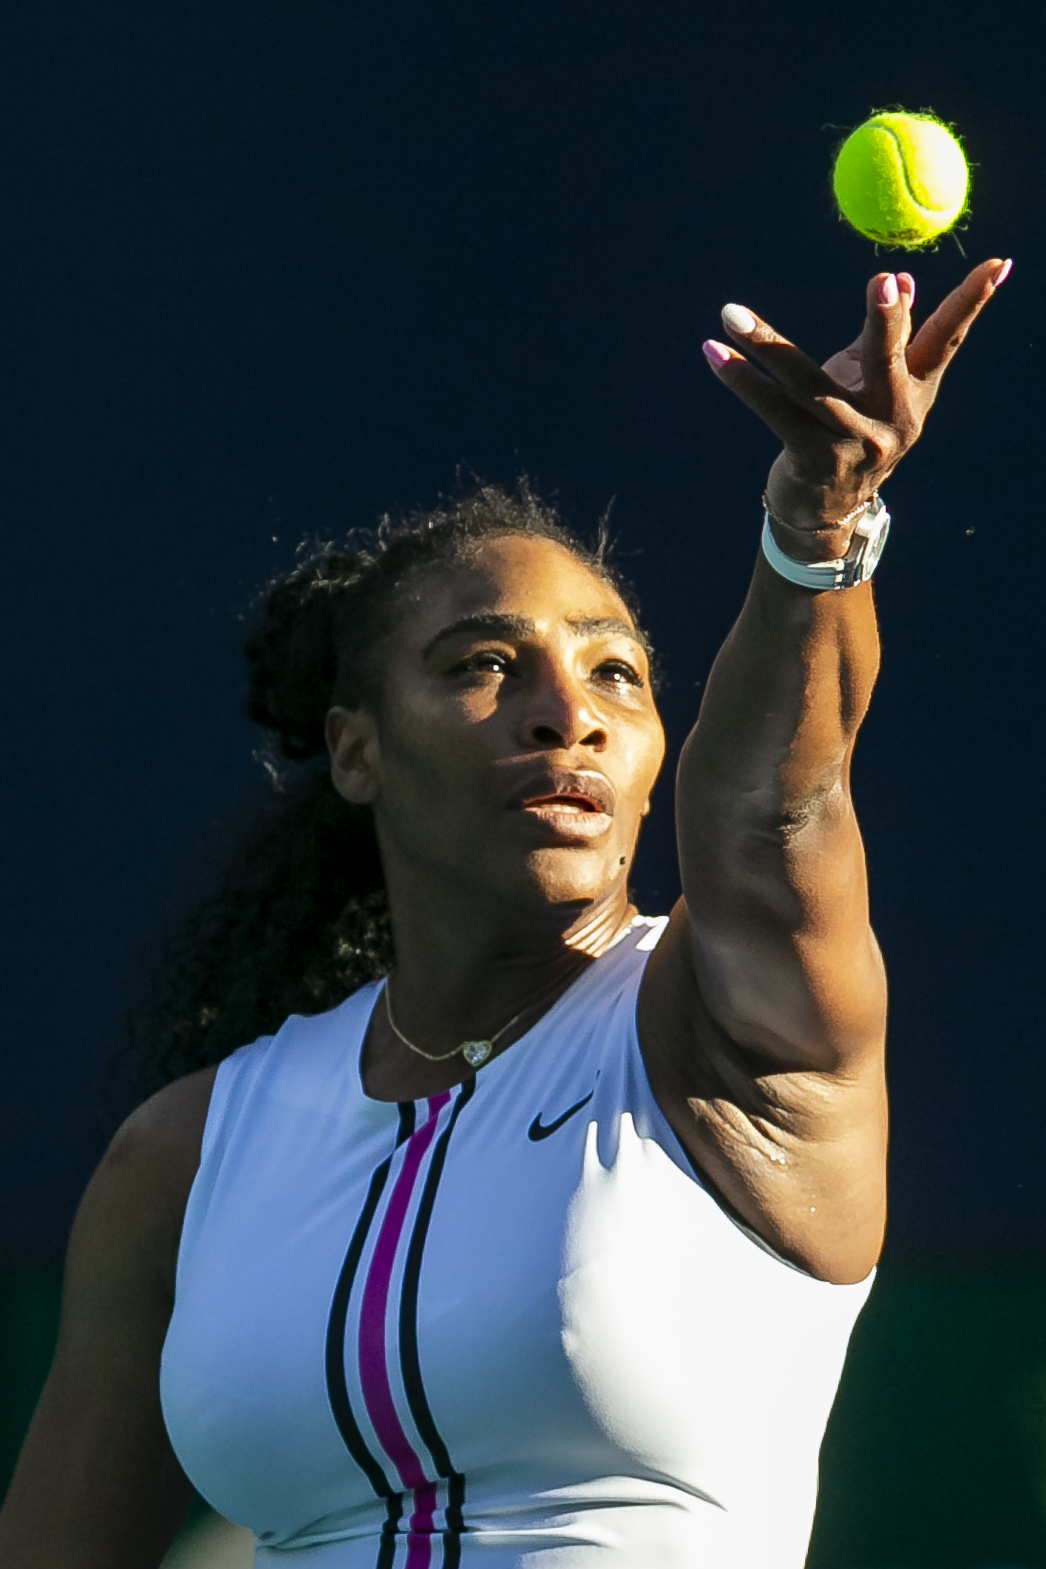  Serena Williams, of the United States, serves against Rebecca Peterson, of Sweden, during their match at the Miami Open tennis tournament on Friday, March 22, 2019 at Hard Rock Stadium in Miami Gardens. 